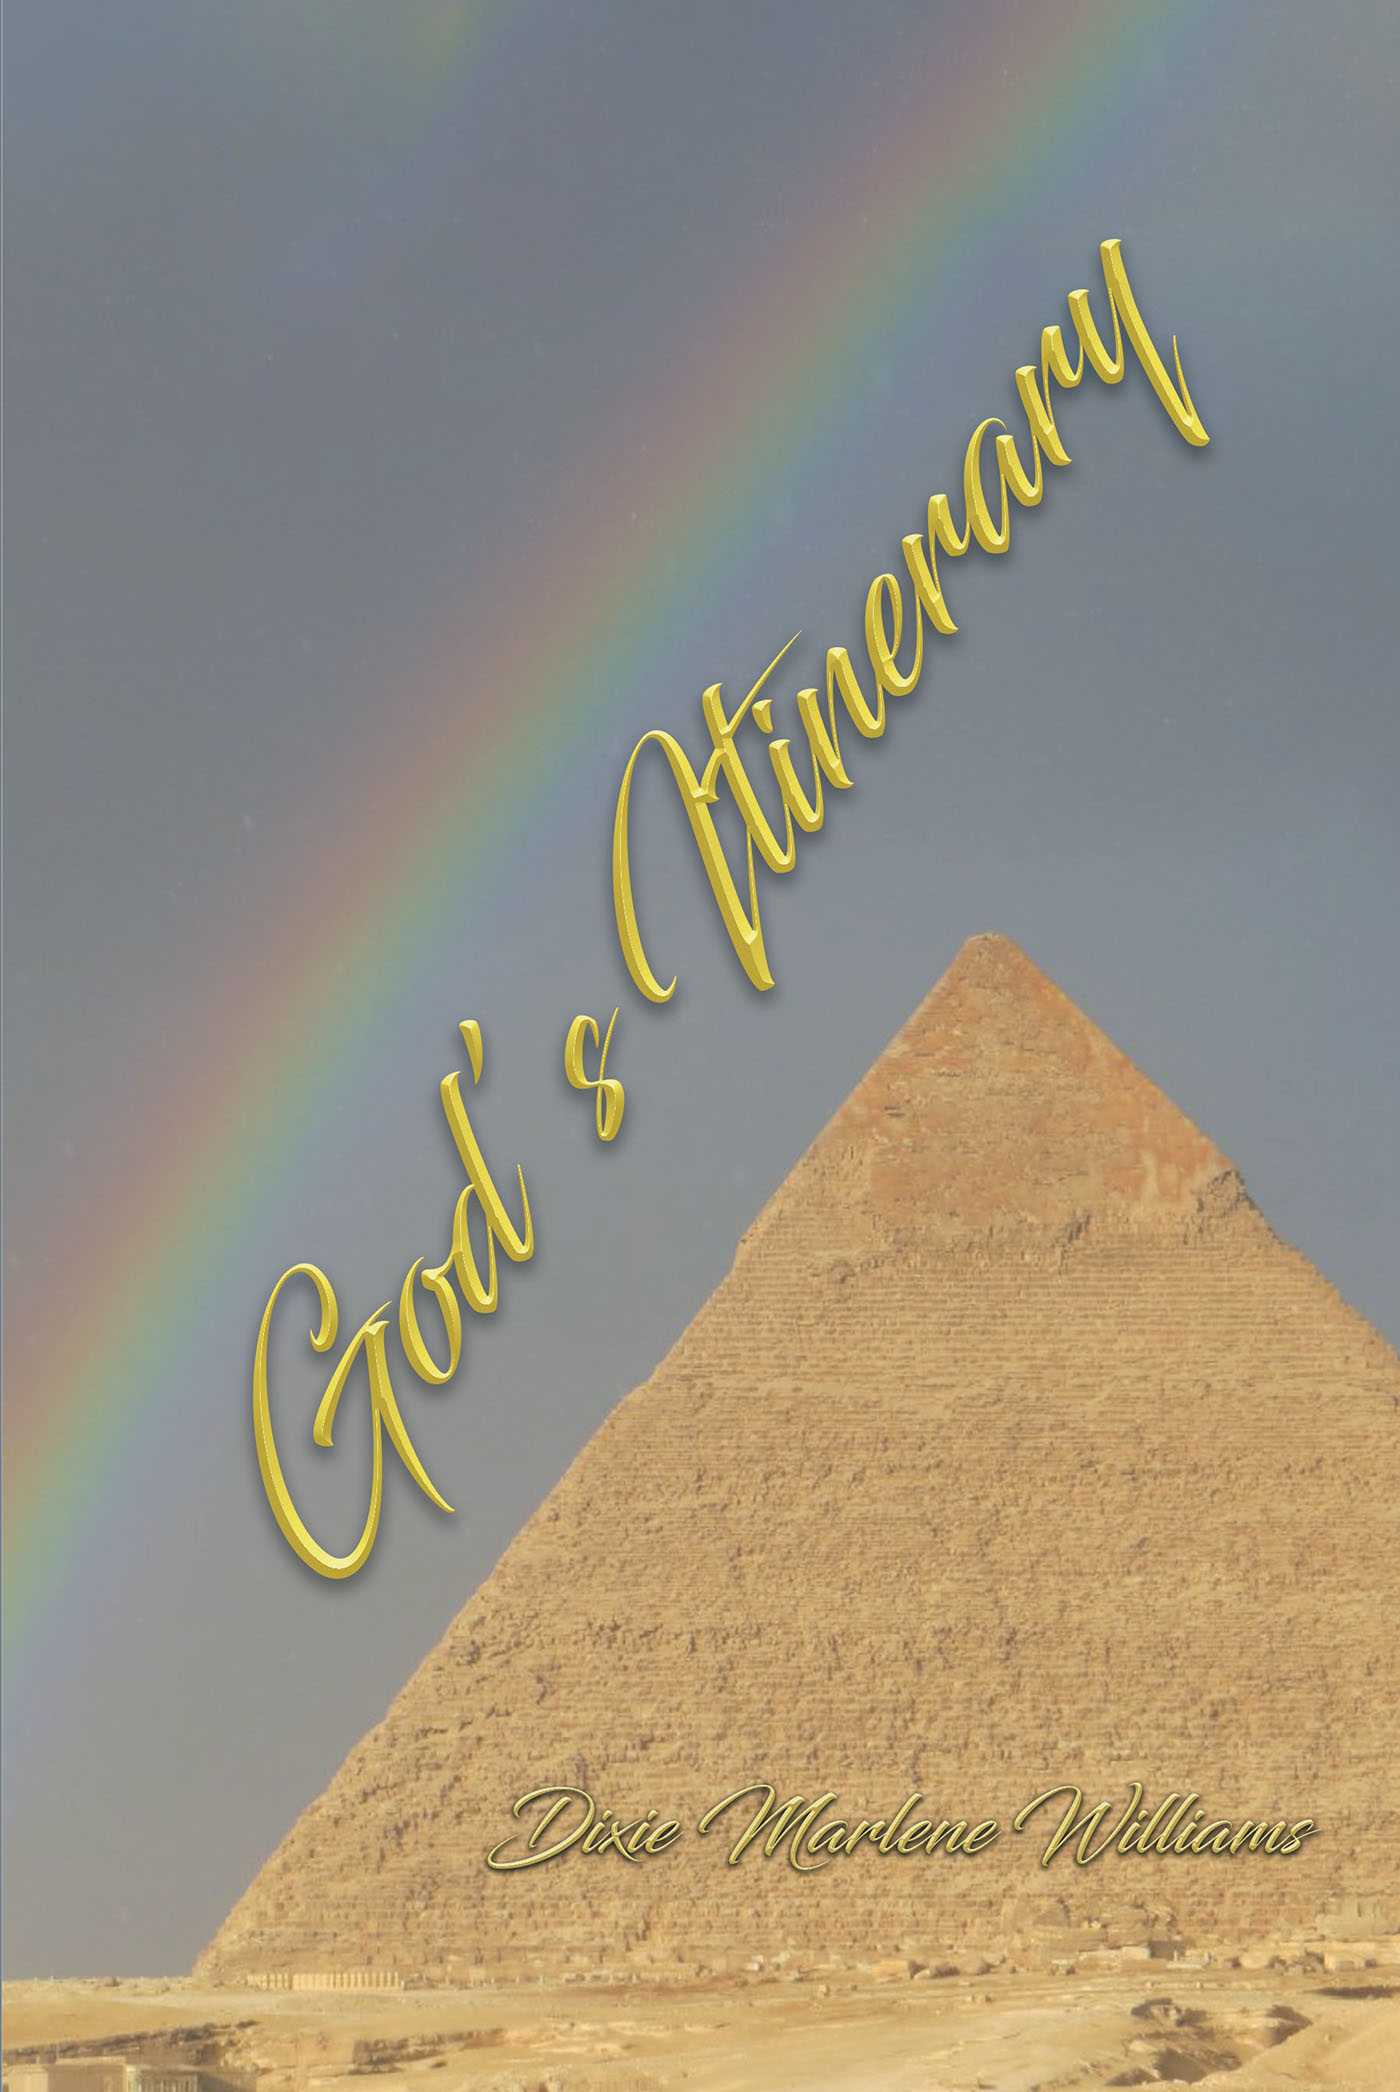 Author Dixie Marlene Williams’s New Book, "God's Itinerary," is a Thrilling Collection of Journal Entries That Document the Author's Incredible Journeys Around the World